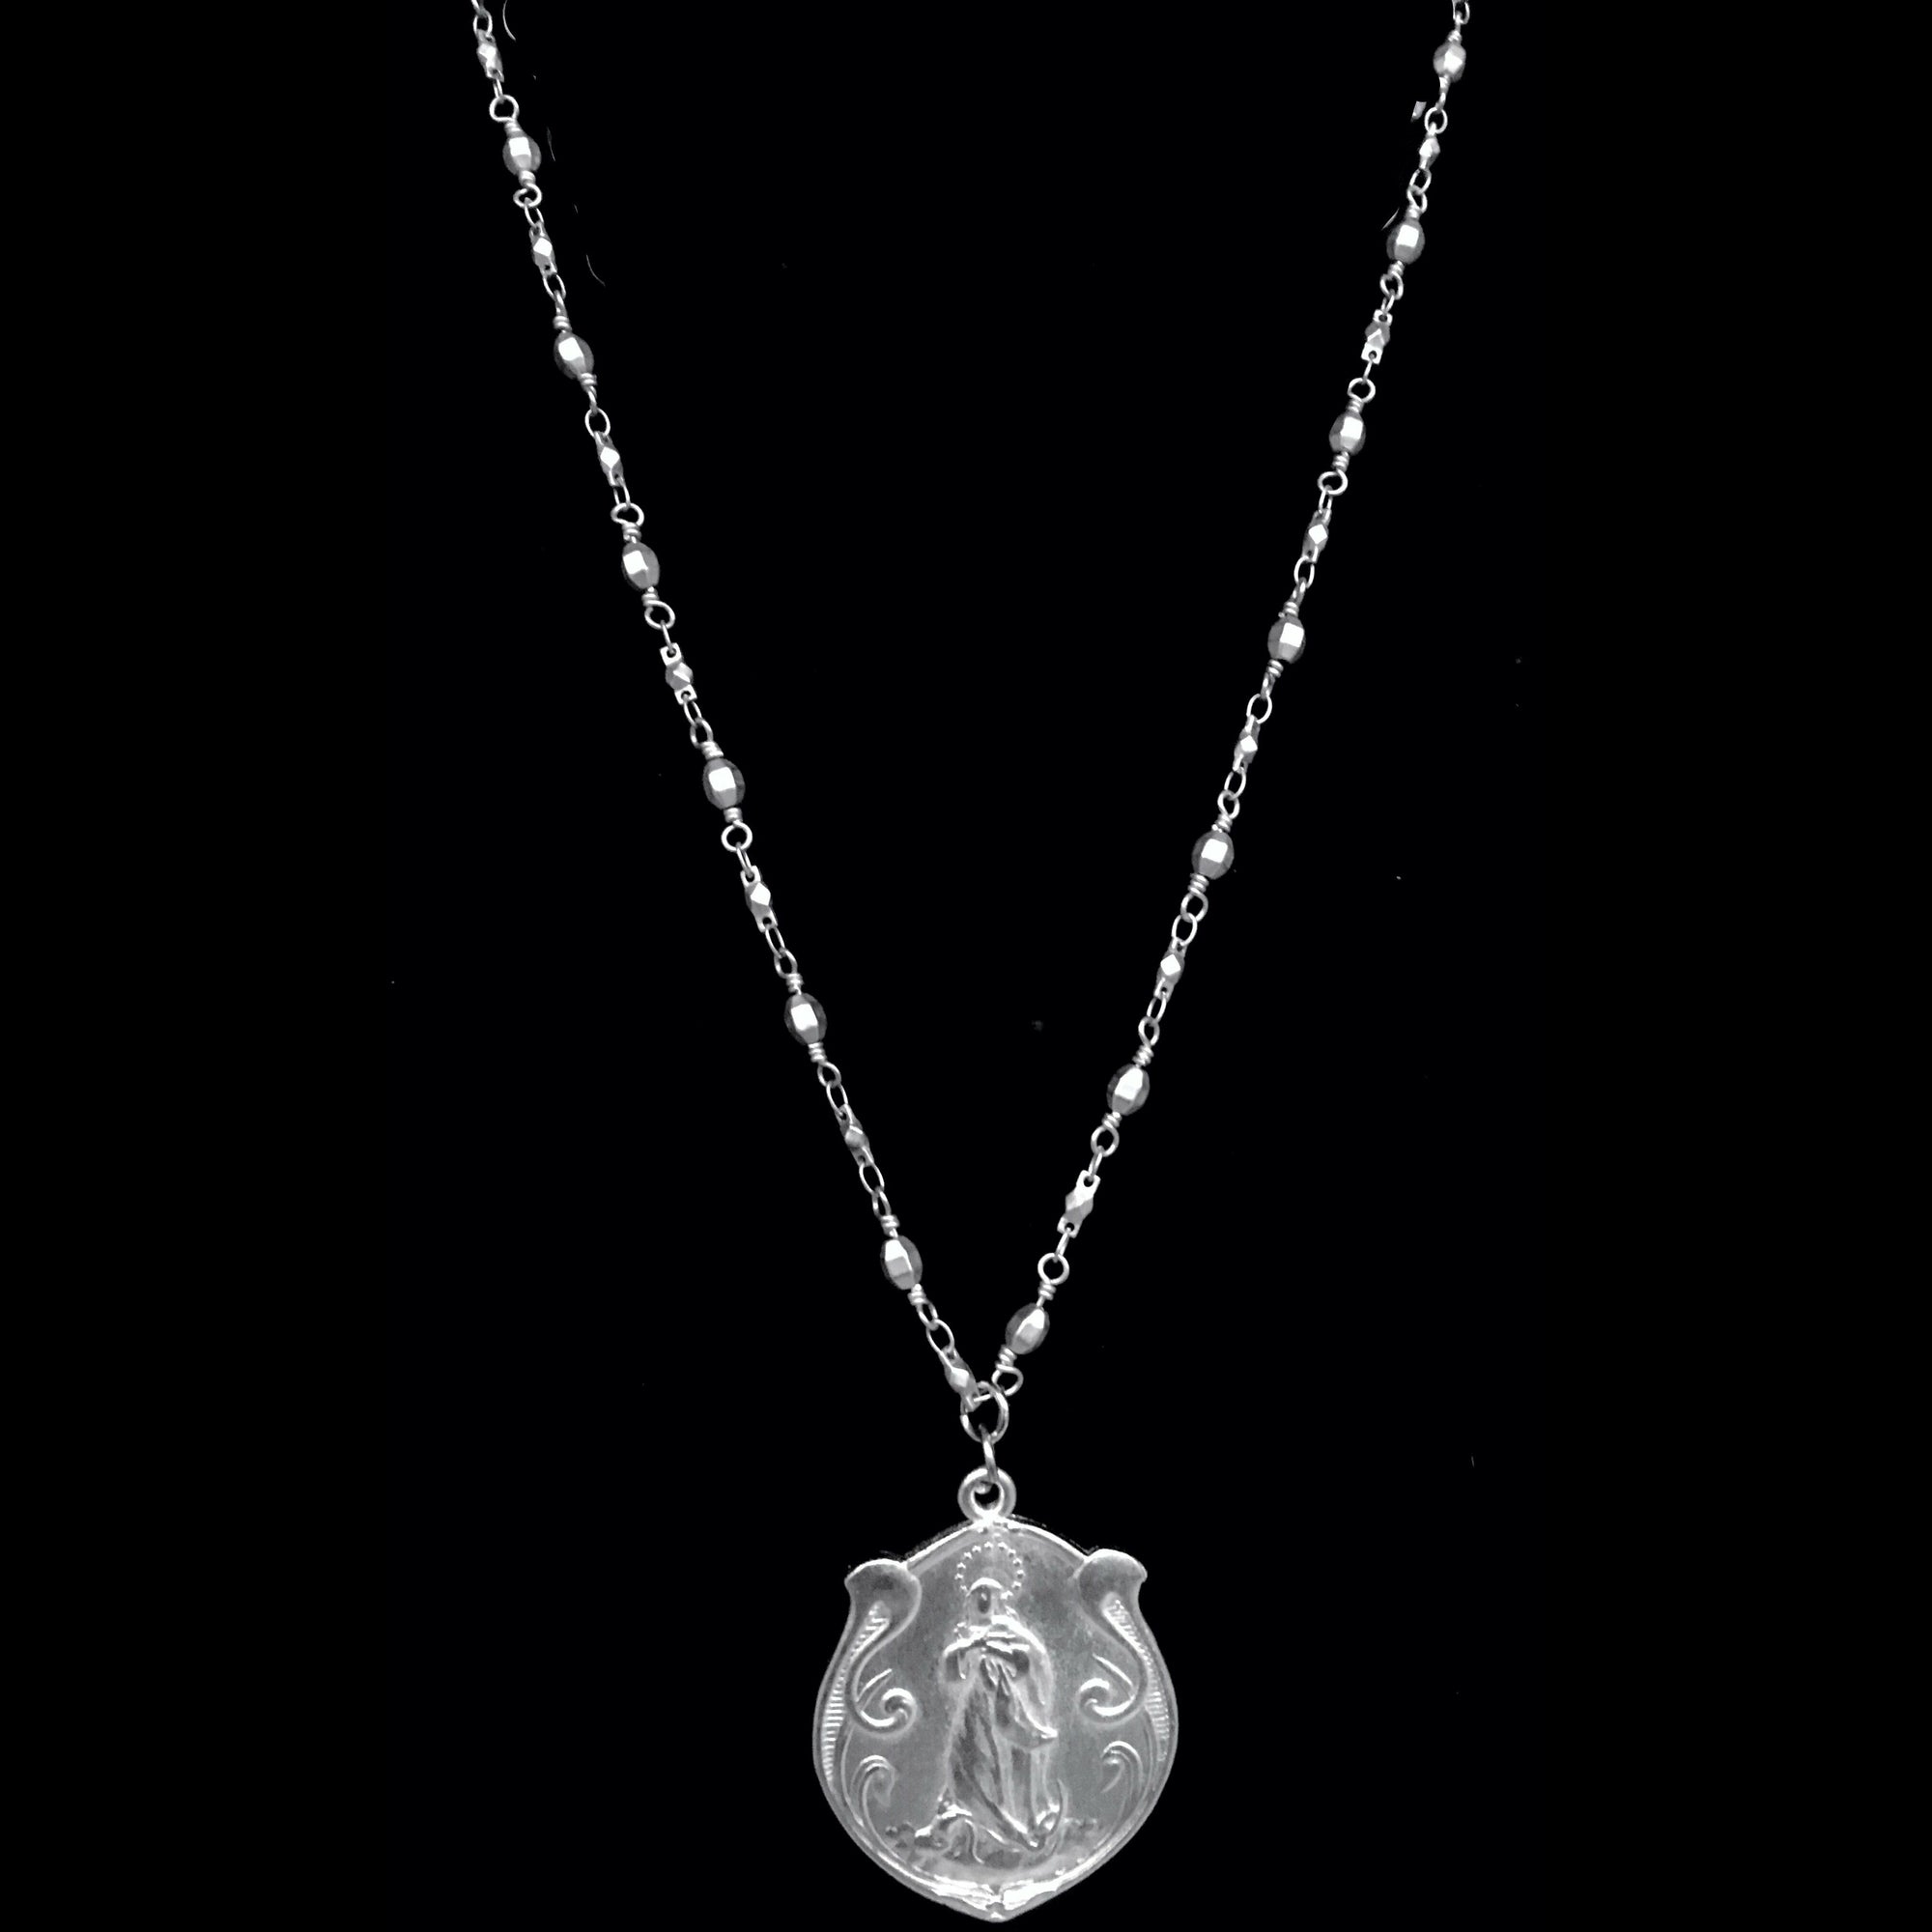 Assumption Art Nouveau Madonna Chain Necklace  by Whispering Goddess - Silver